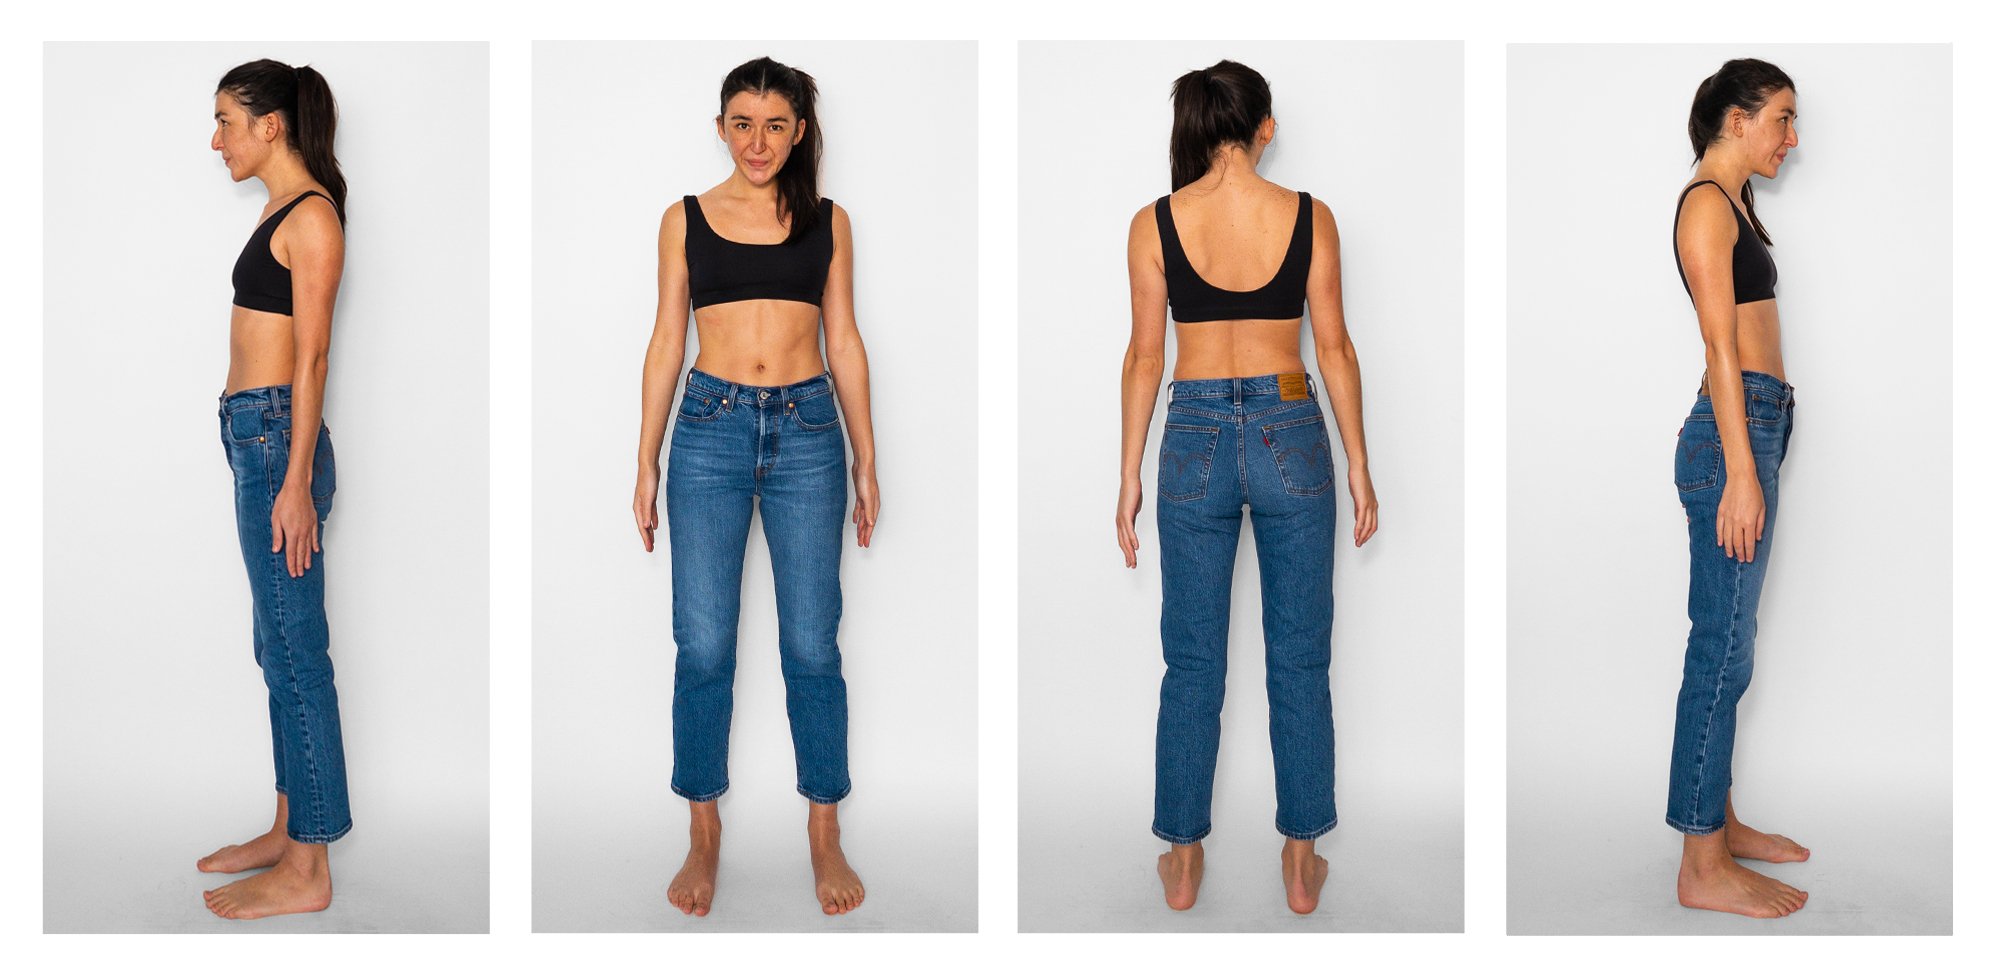 Levi's Wedgie Straight jeans sizing